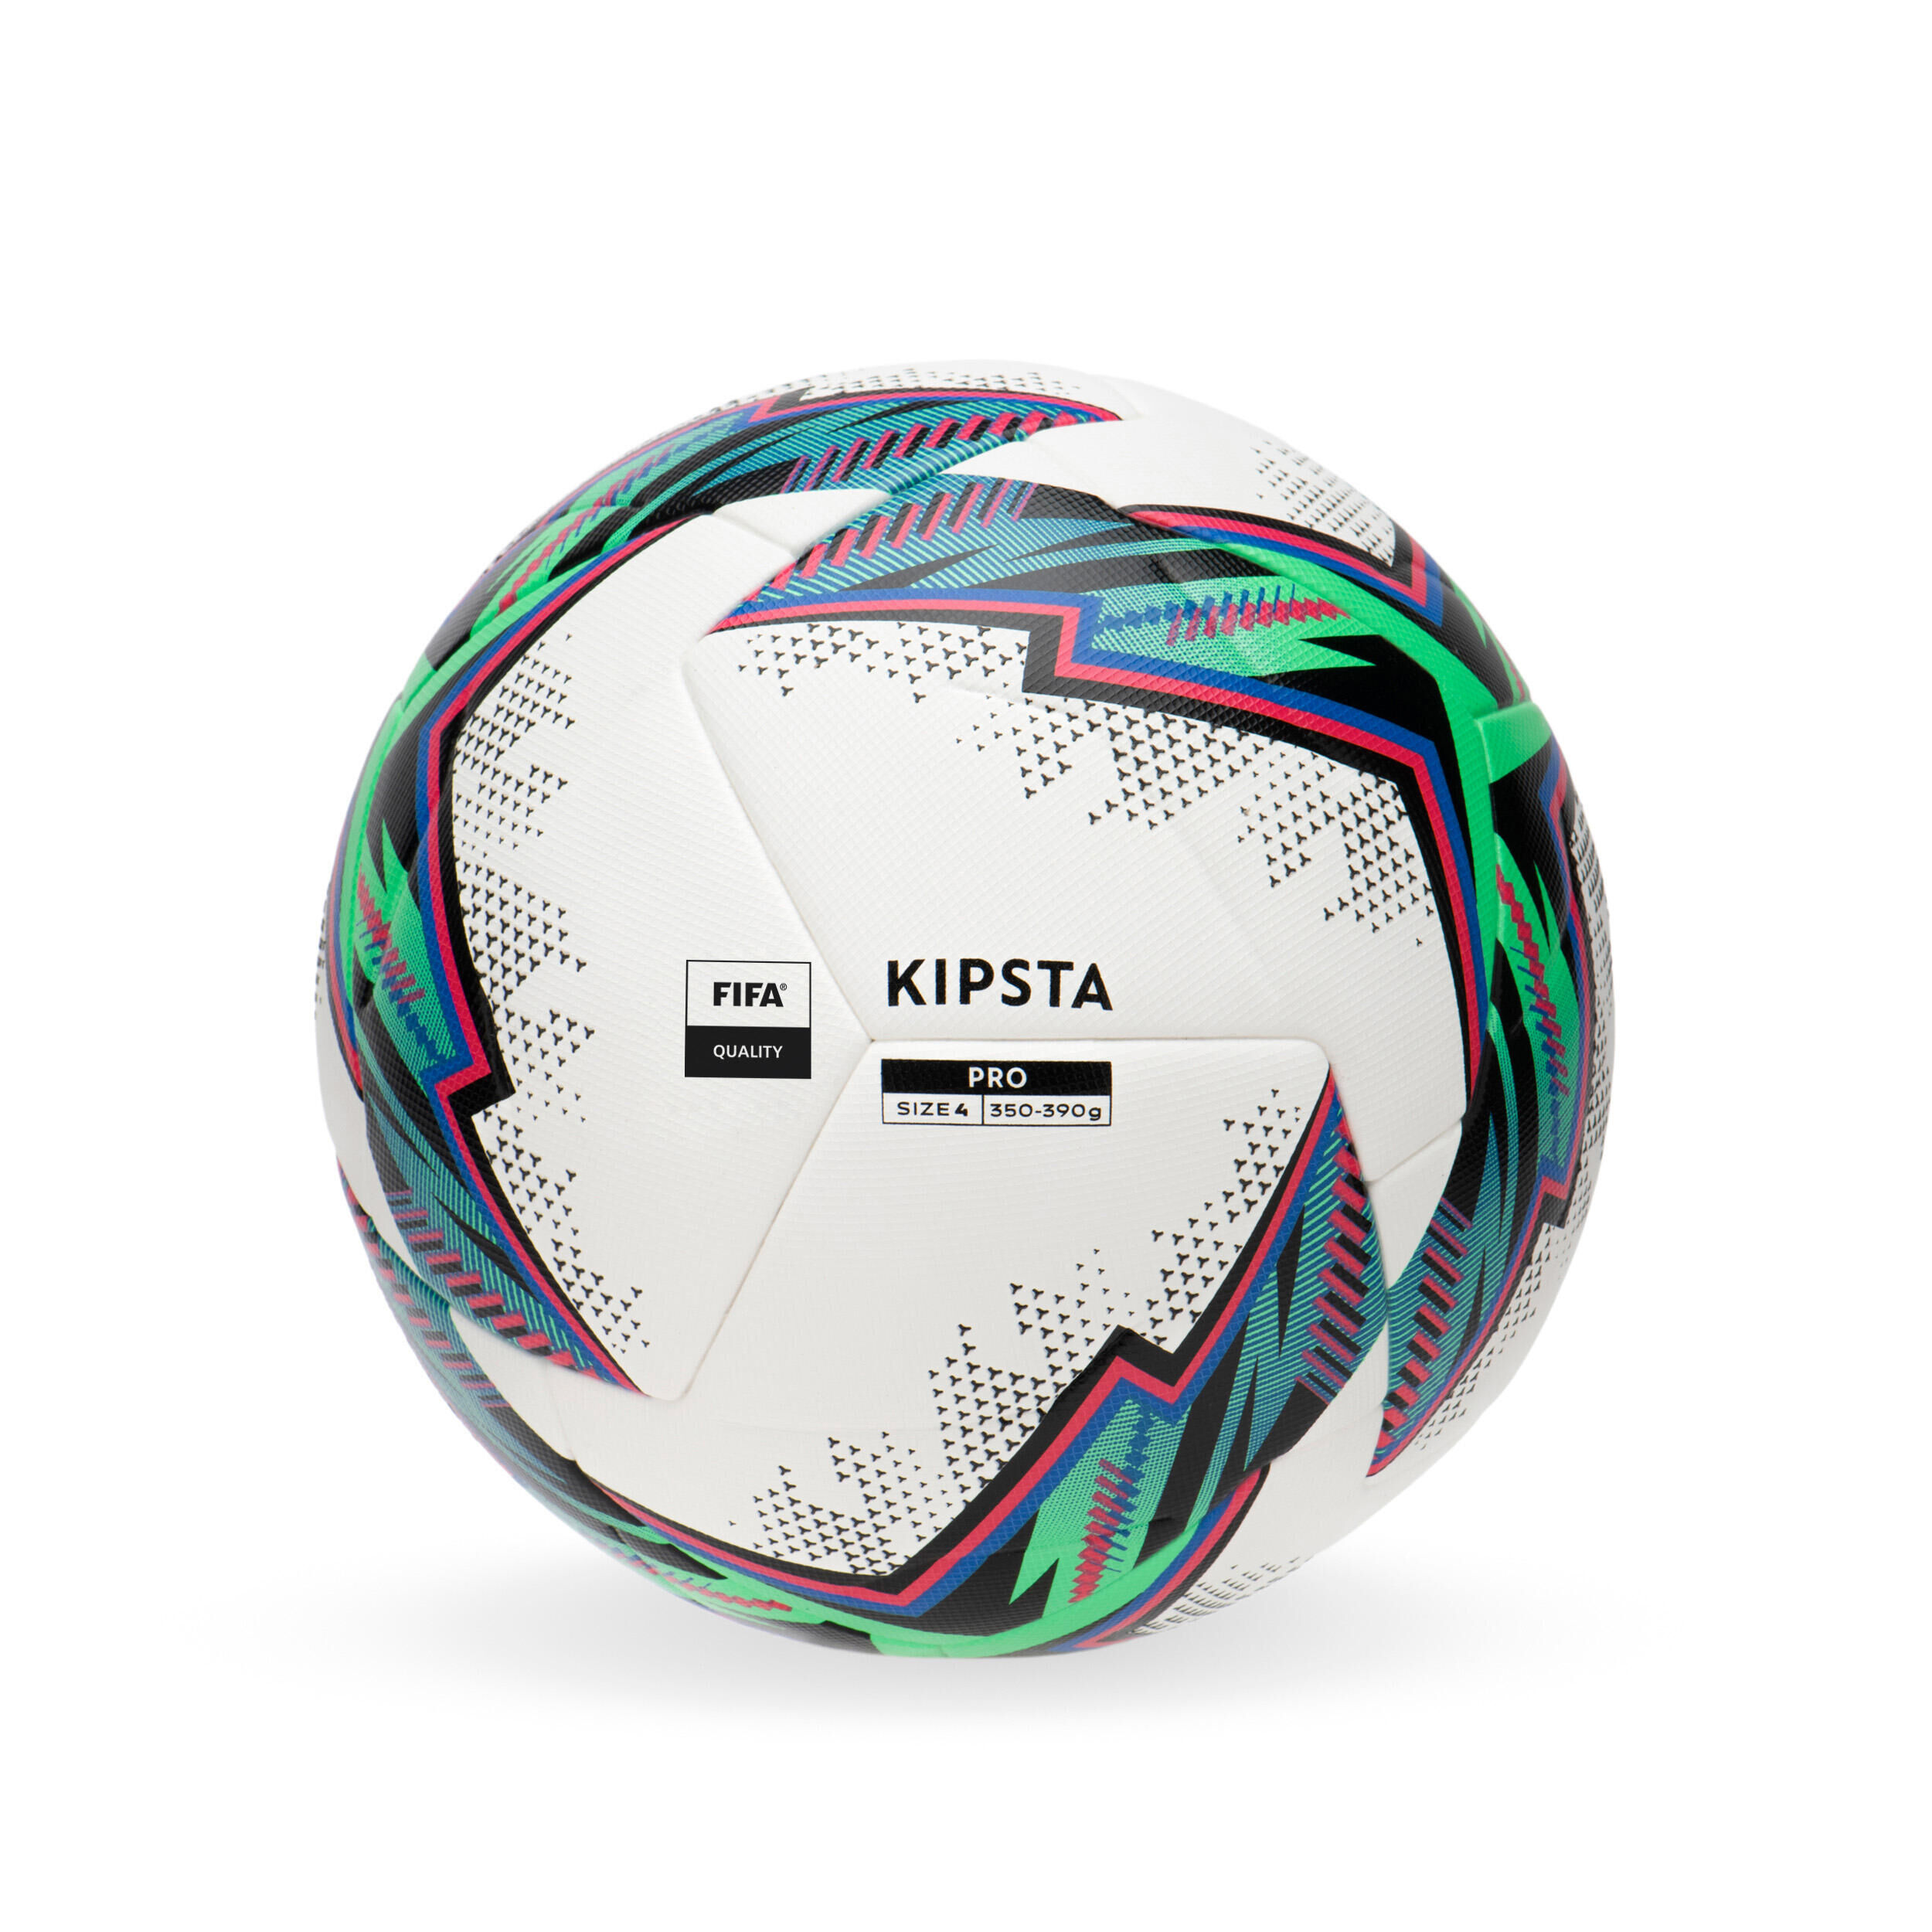 KIPSTA Thermobonded Size 4 FIFA Quality Football Pro Ball - White